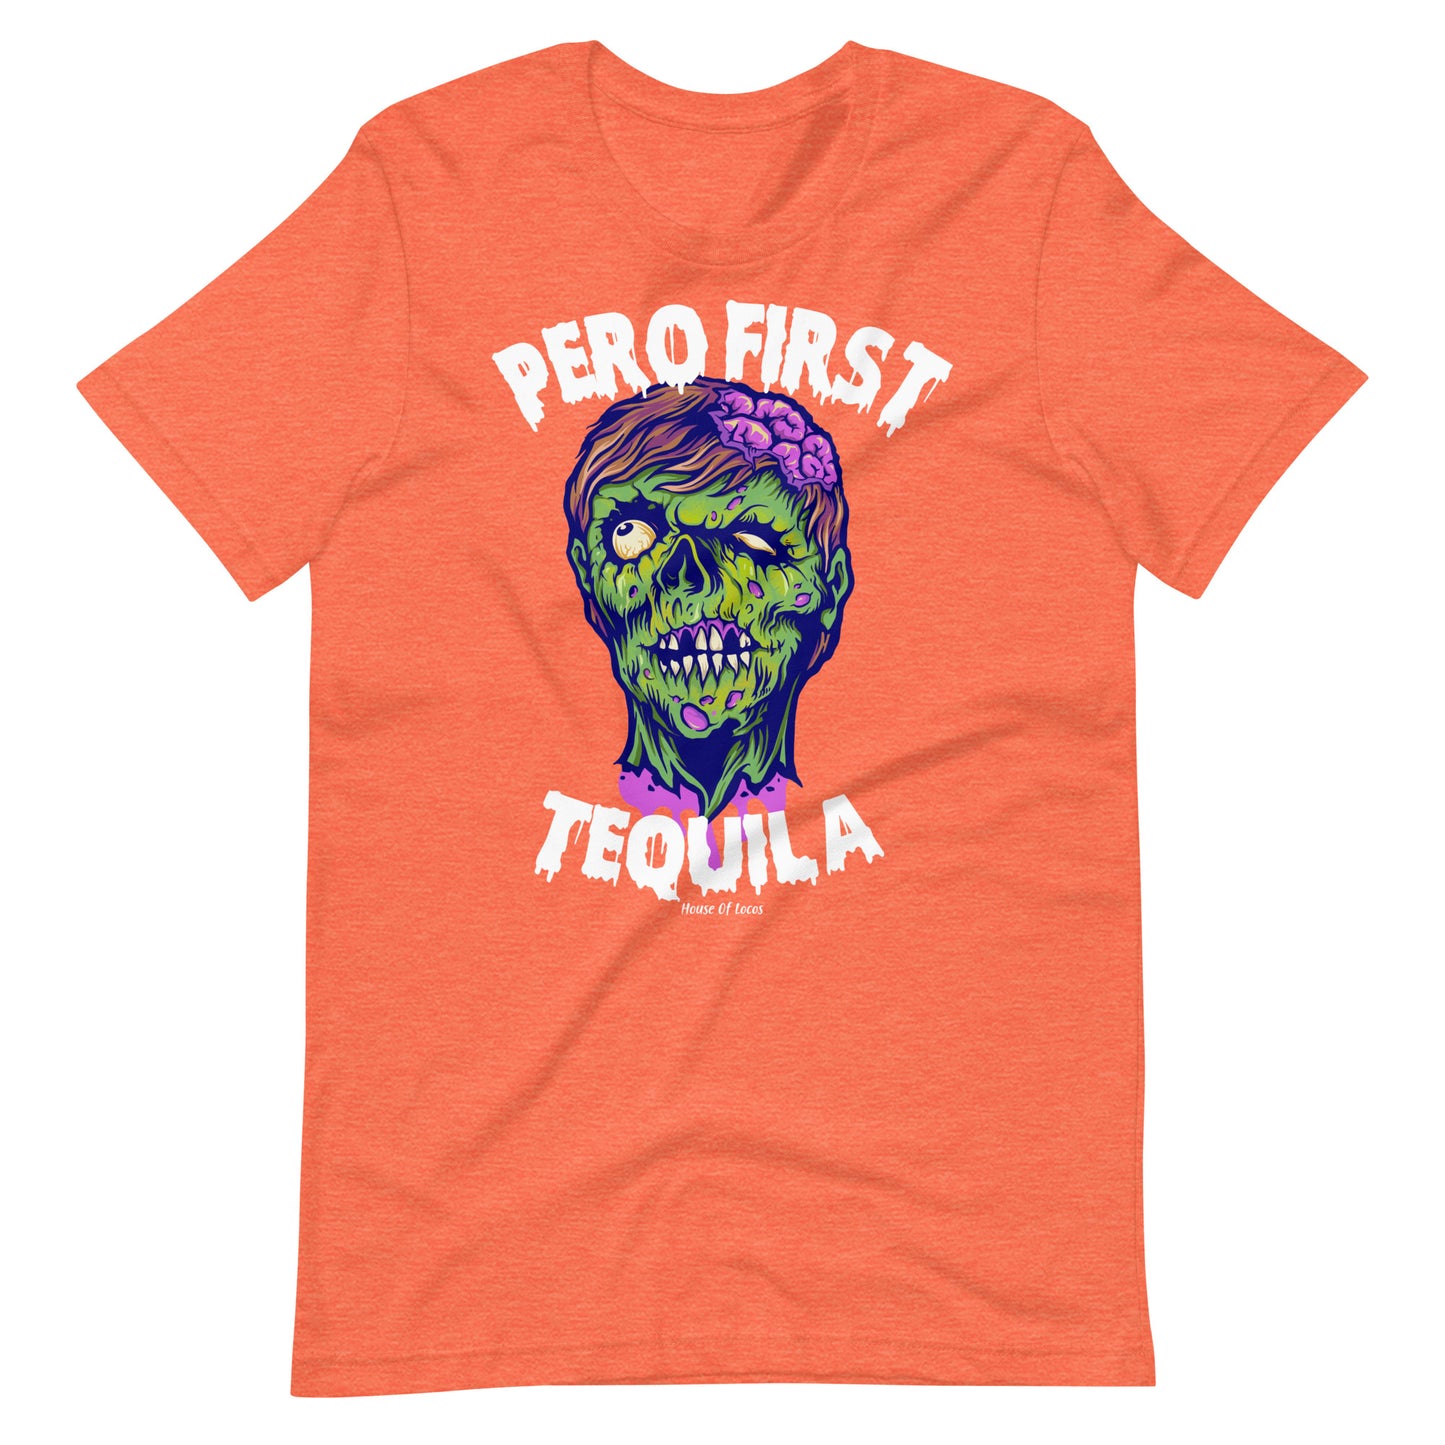 Pero First Tequila Halloween T-Shirt